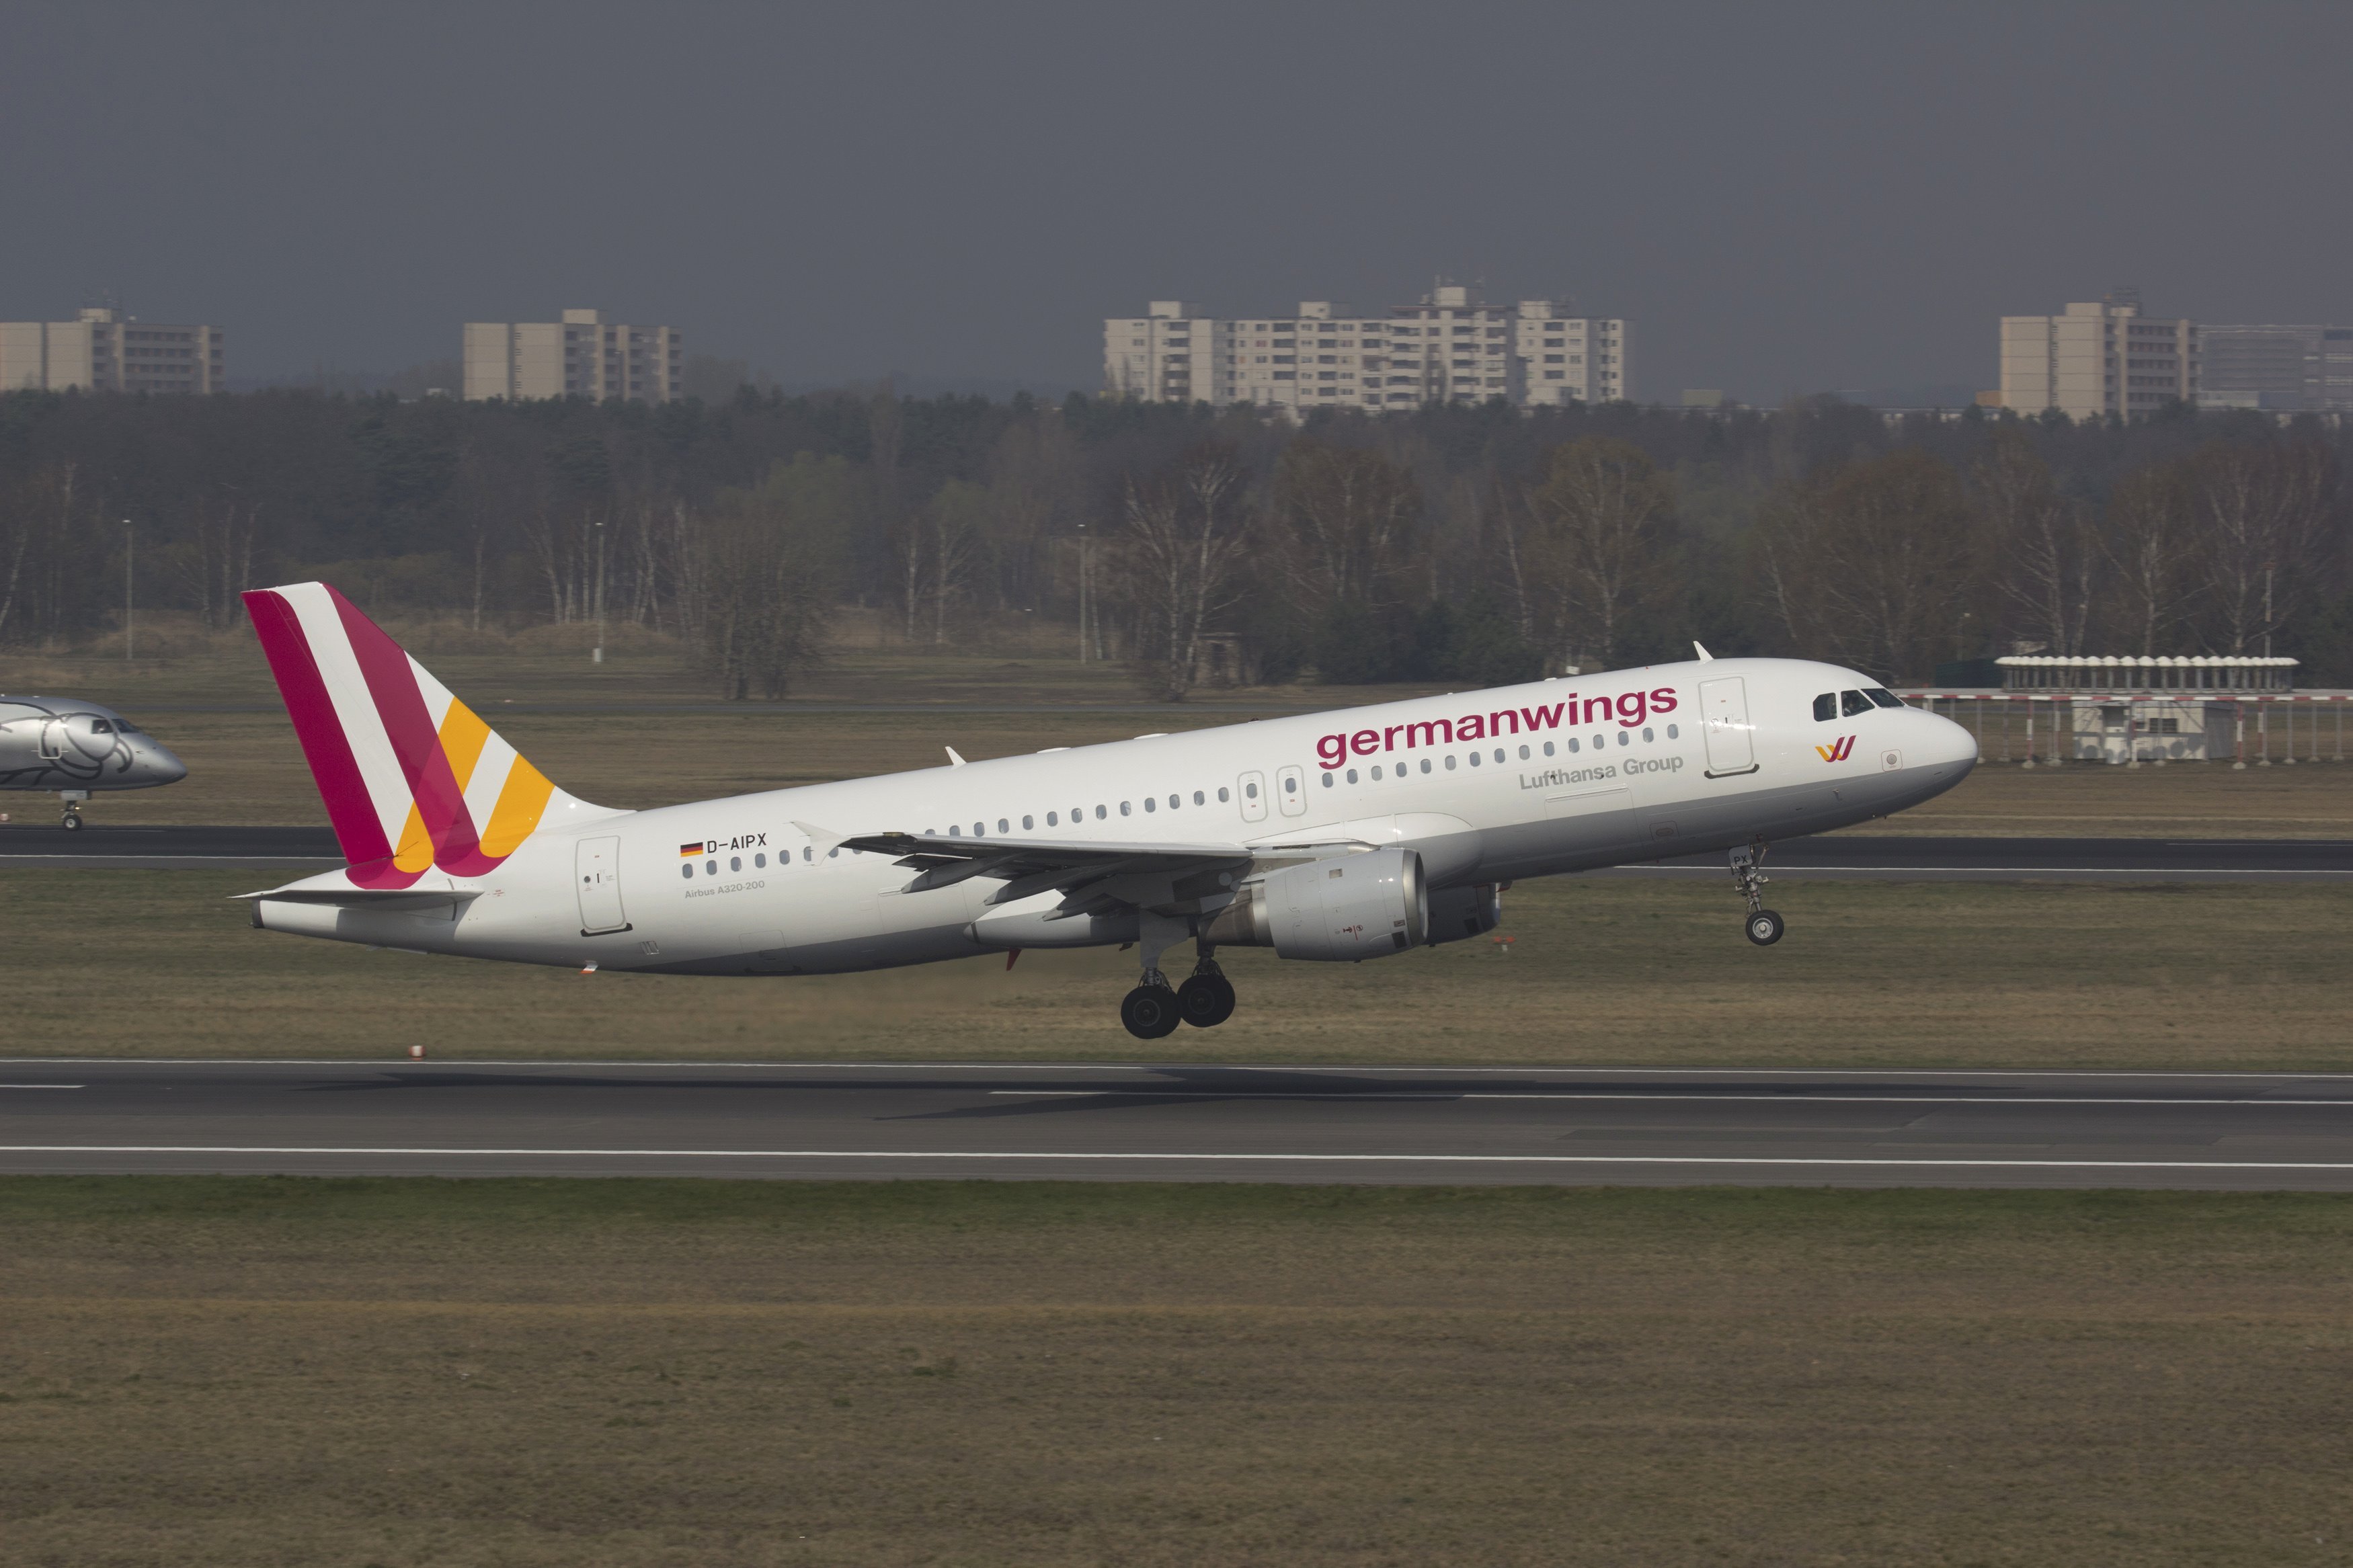 A Germanwings Airbus A320 is seen at the Berlin airport, March 29, 2014. An Airbus plane of the same model crashed in southern France en route from Barcelona to Duesseldorf, on March 24, 2015 police and aviation officials said. (Jan Seba—Reuters)